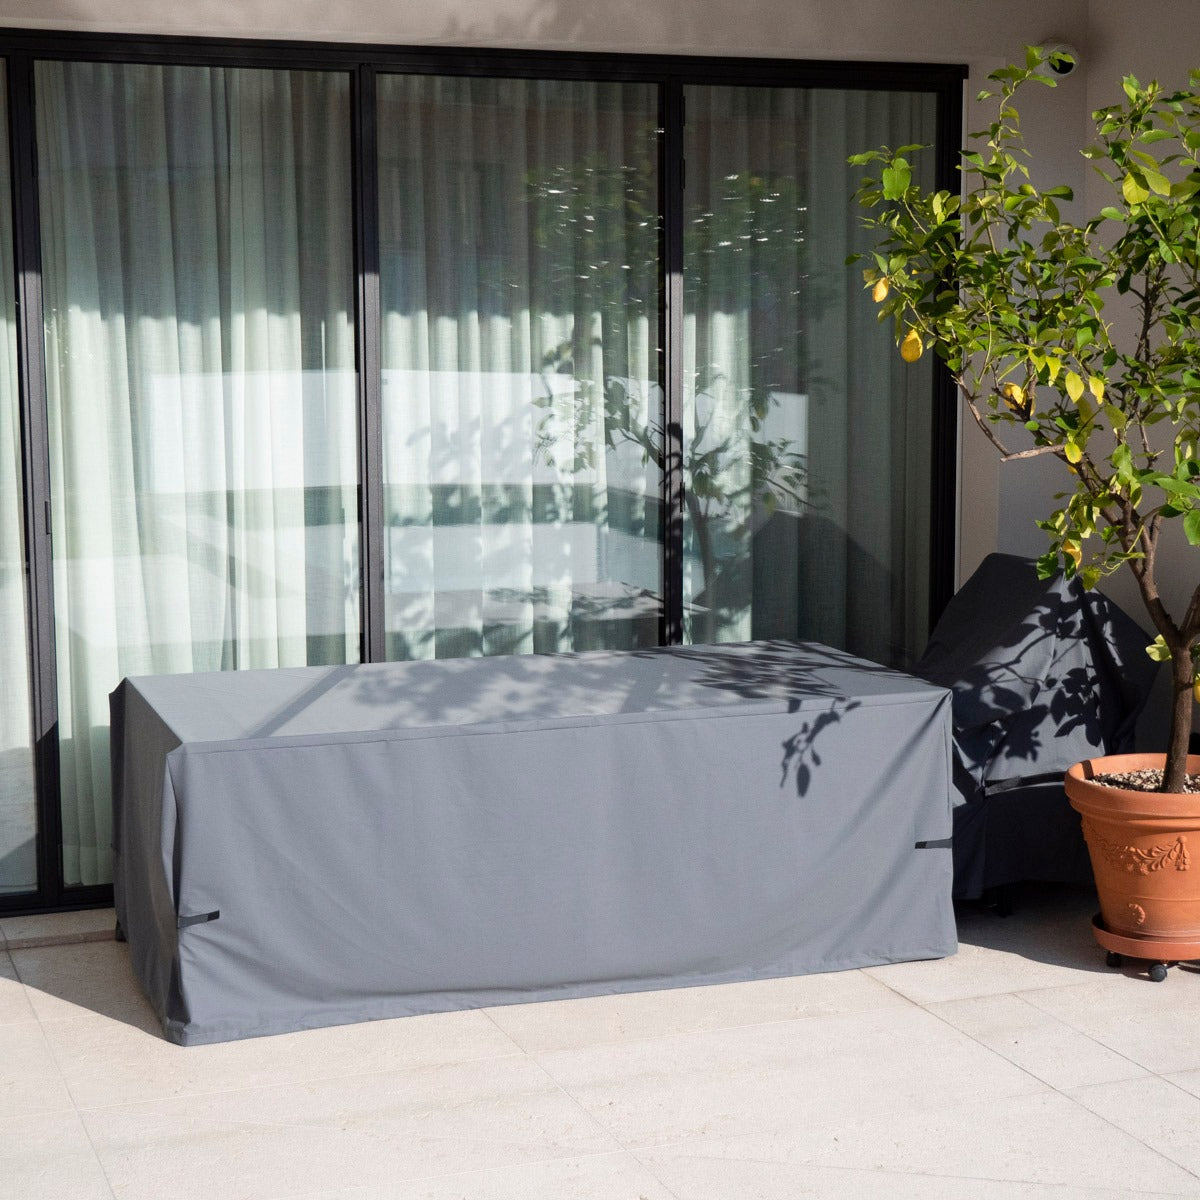 NARDI EXTRA LARGE Cover for Outdoor Table 215 x 105 cm